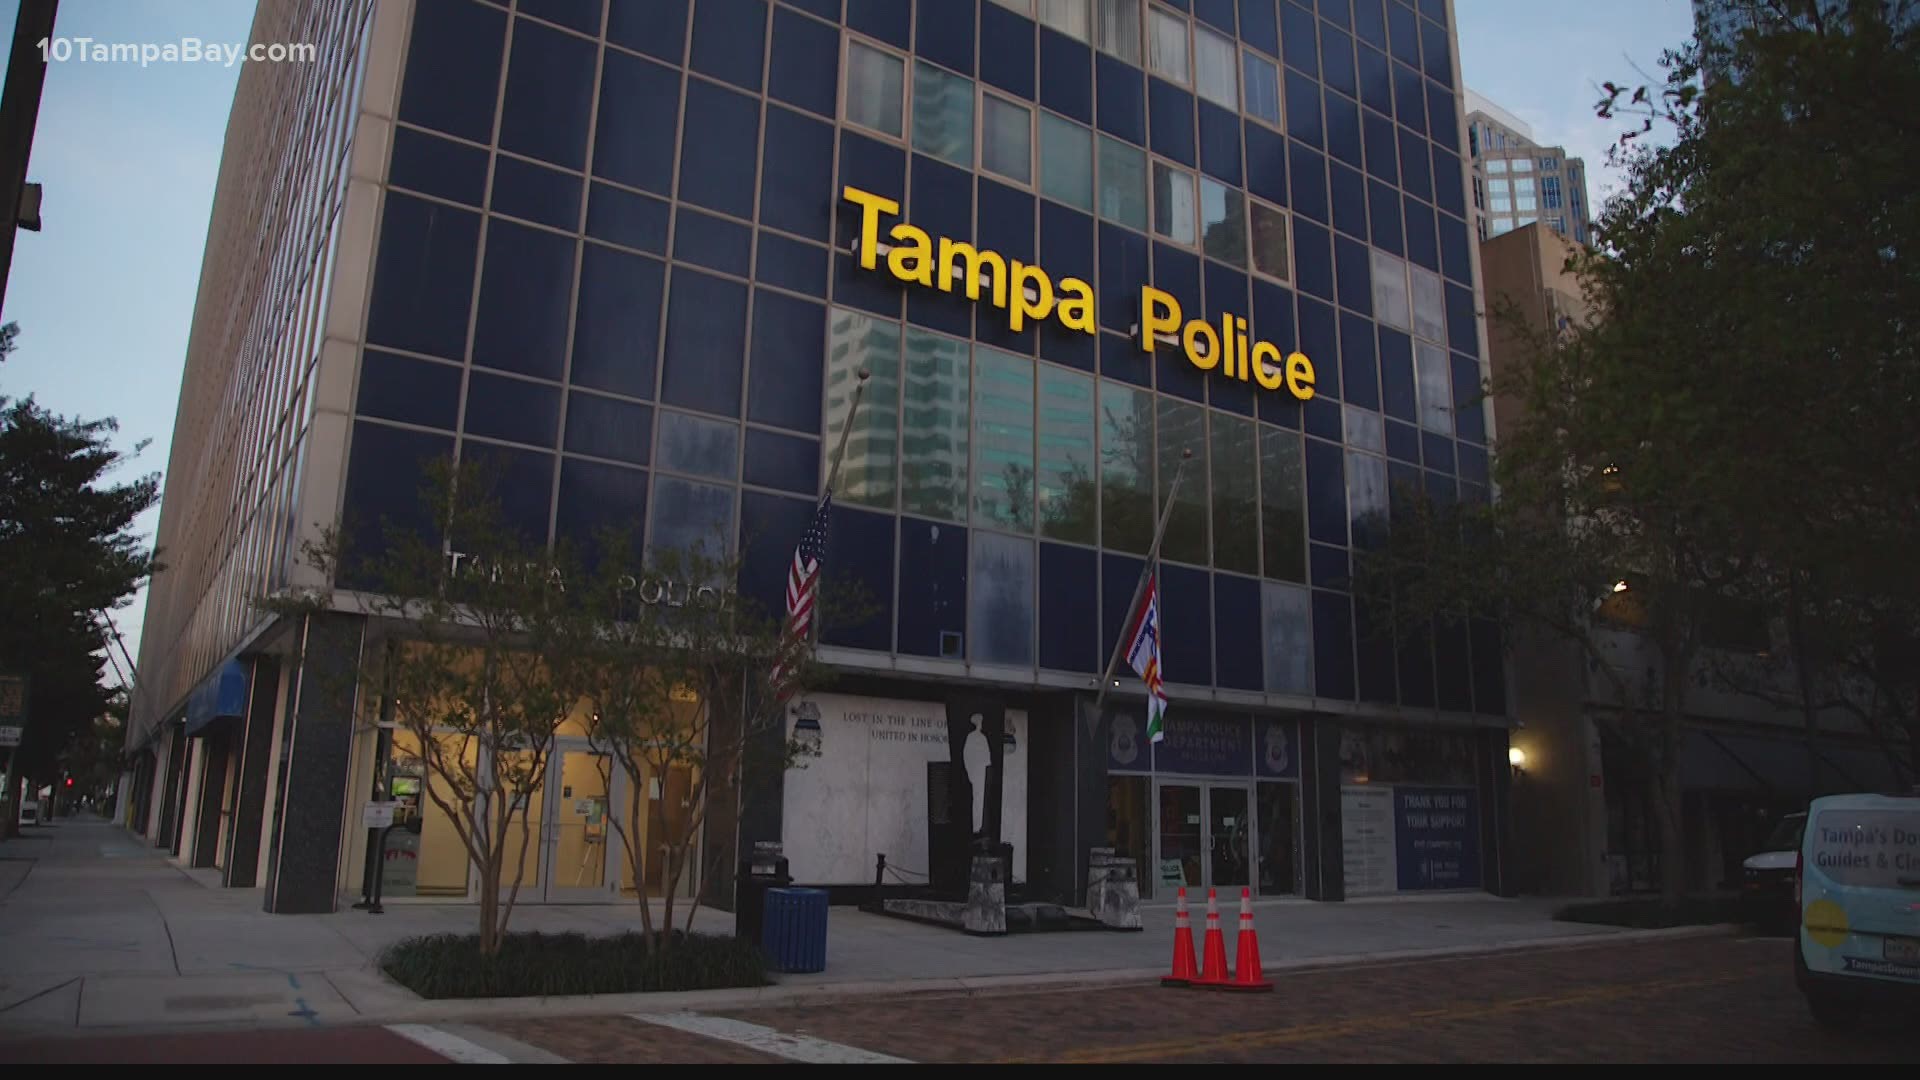 One of those properties includes the Tampa Police Department's current headquarters.